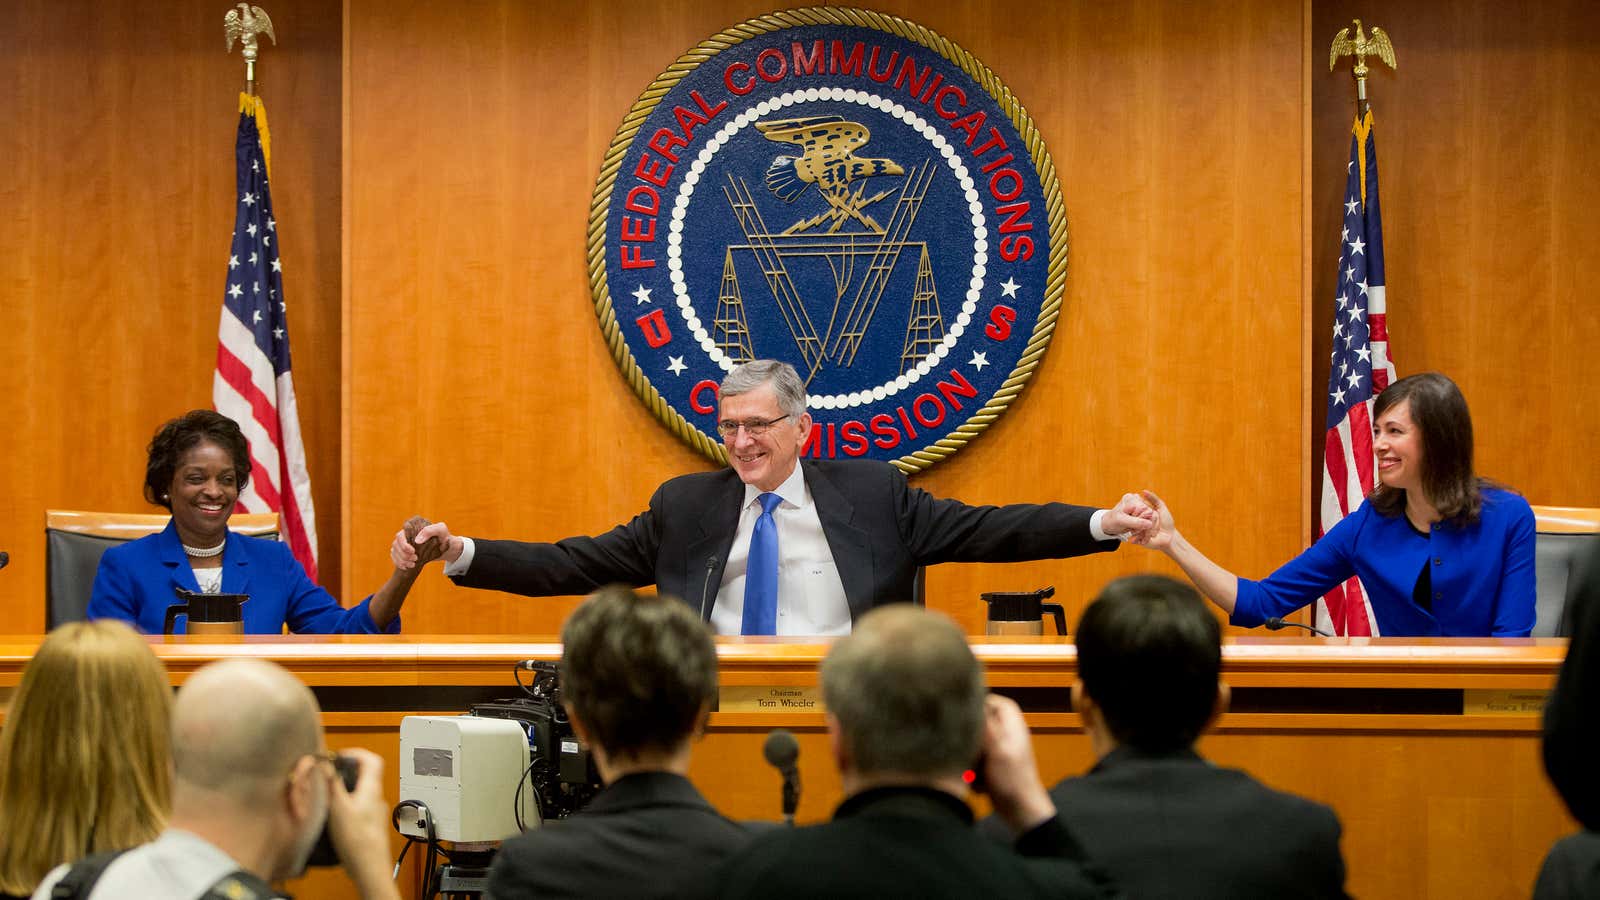 The Federal Communication Commission smiles in the battle for net neutrality.